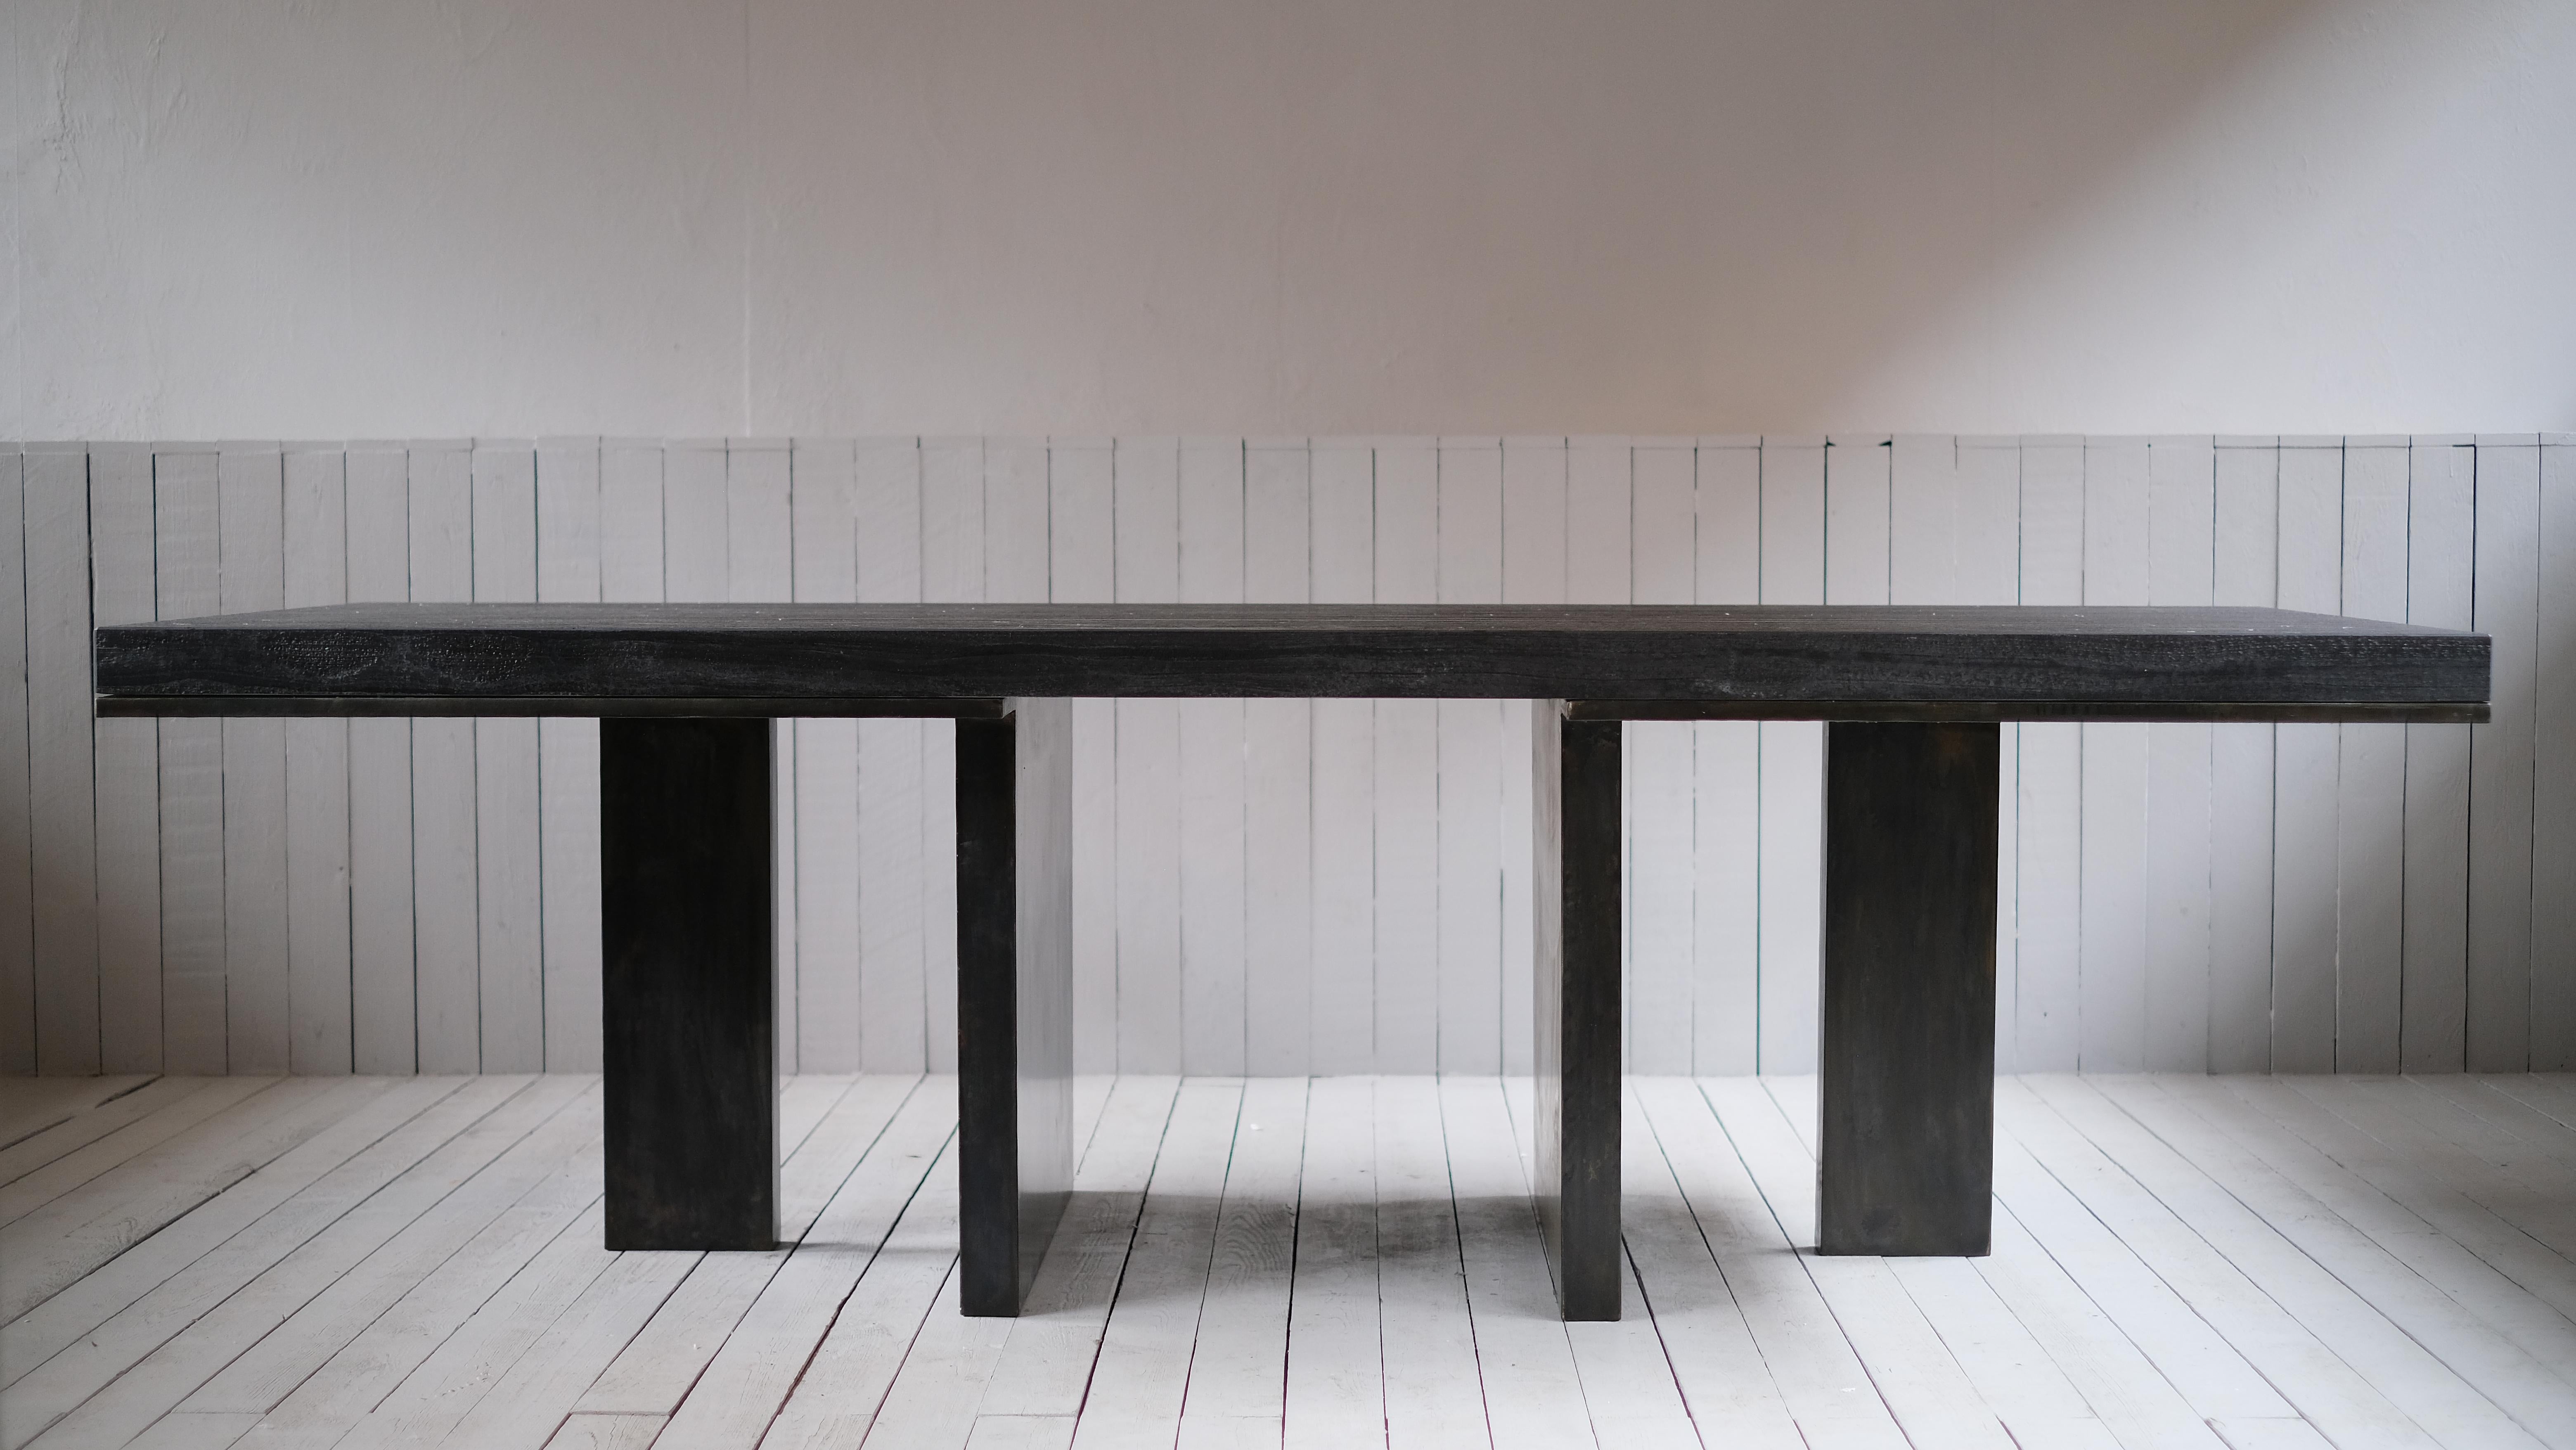 Dining table by Arno Declercq
Limited edition of 8
Dimensions: D 210 x W 110 cm x H 75 cm
Materials: Japanese natural stone & patinated steel
Signed by Arno Declercq

Arno Declercq
Belgian designer and art dealer who makes bespoke objects